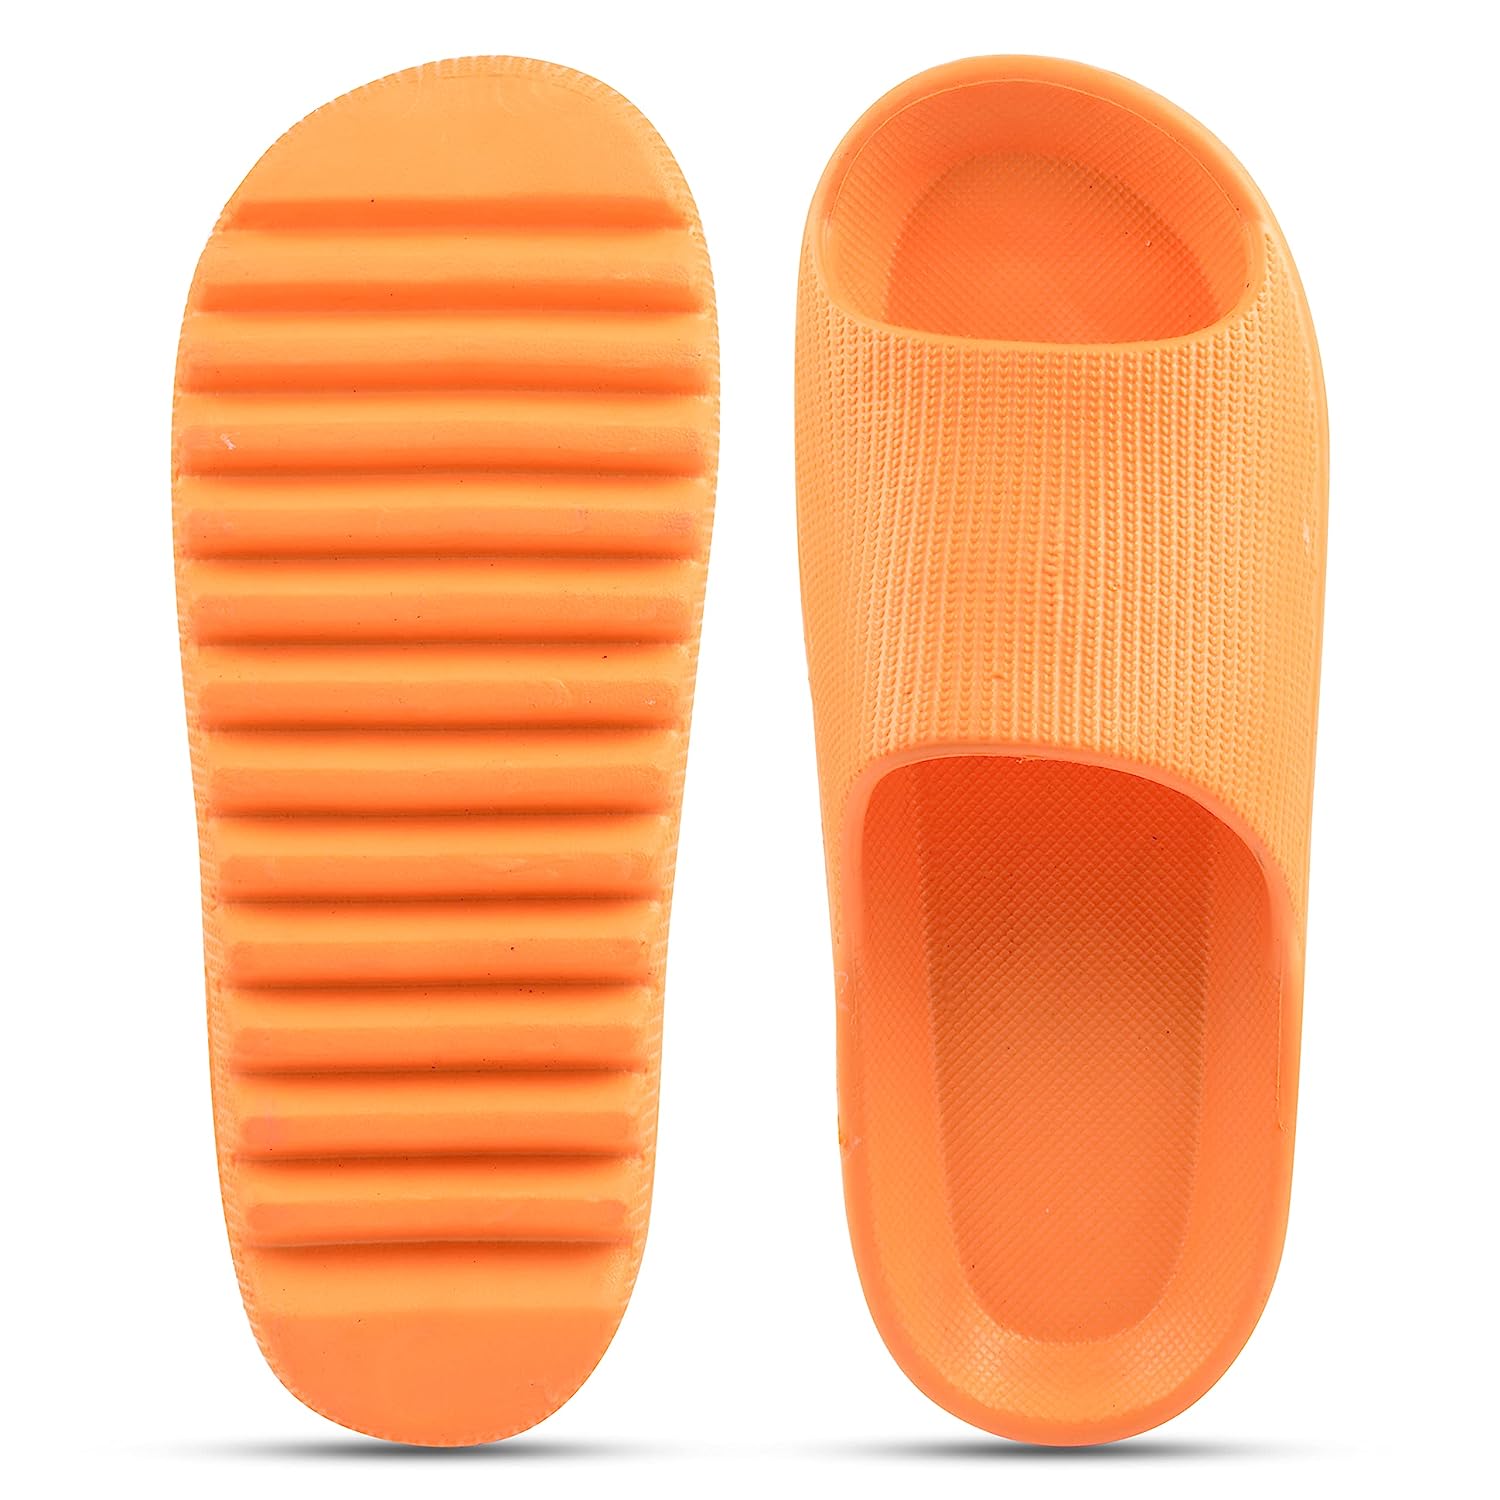 BEONZA Women Stylish Slides Flip Flops Slippers -  fashion Slippers in Sri Lanka from Arcade Online Shopping - Just Rs. 4499!